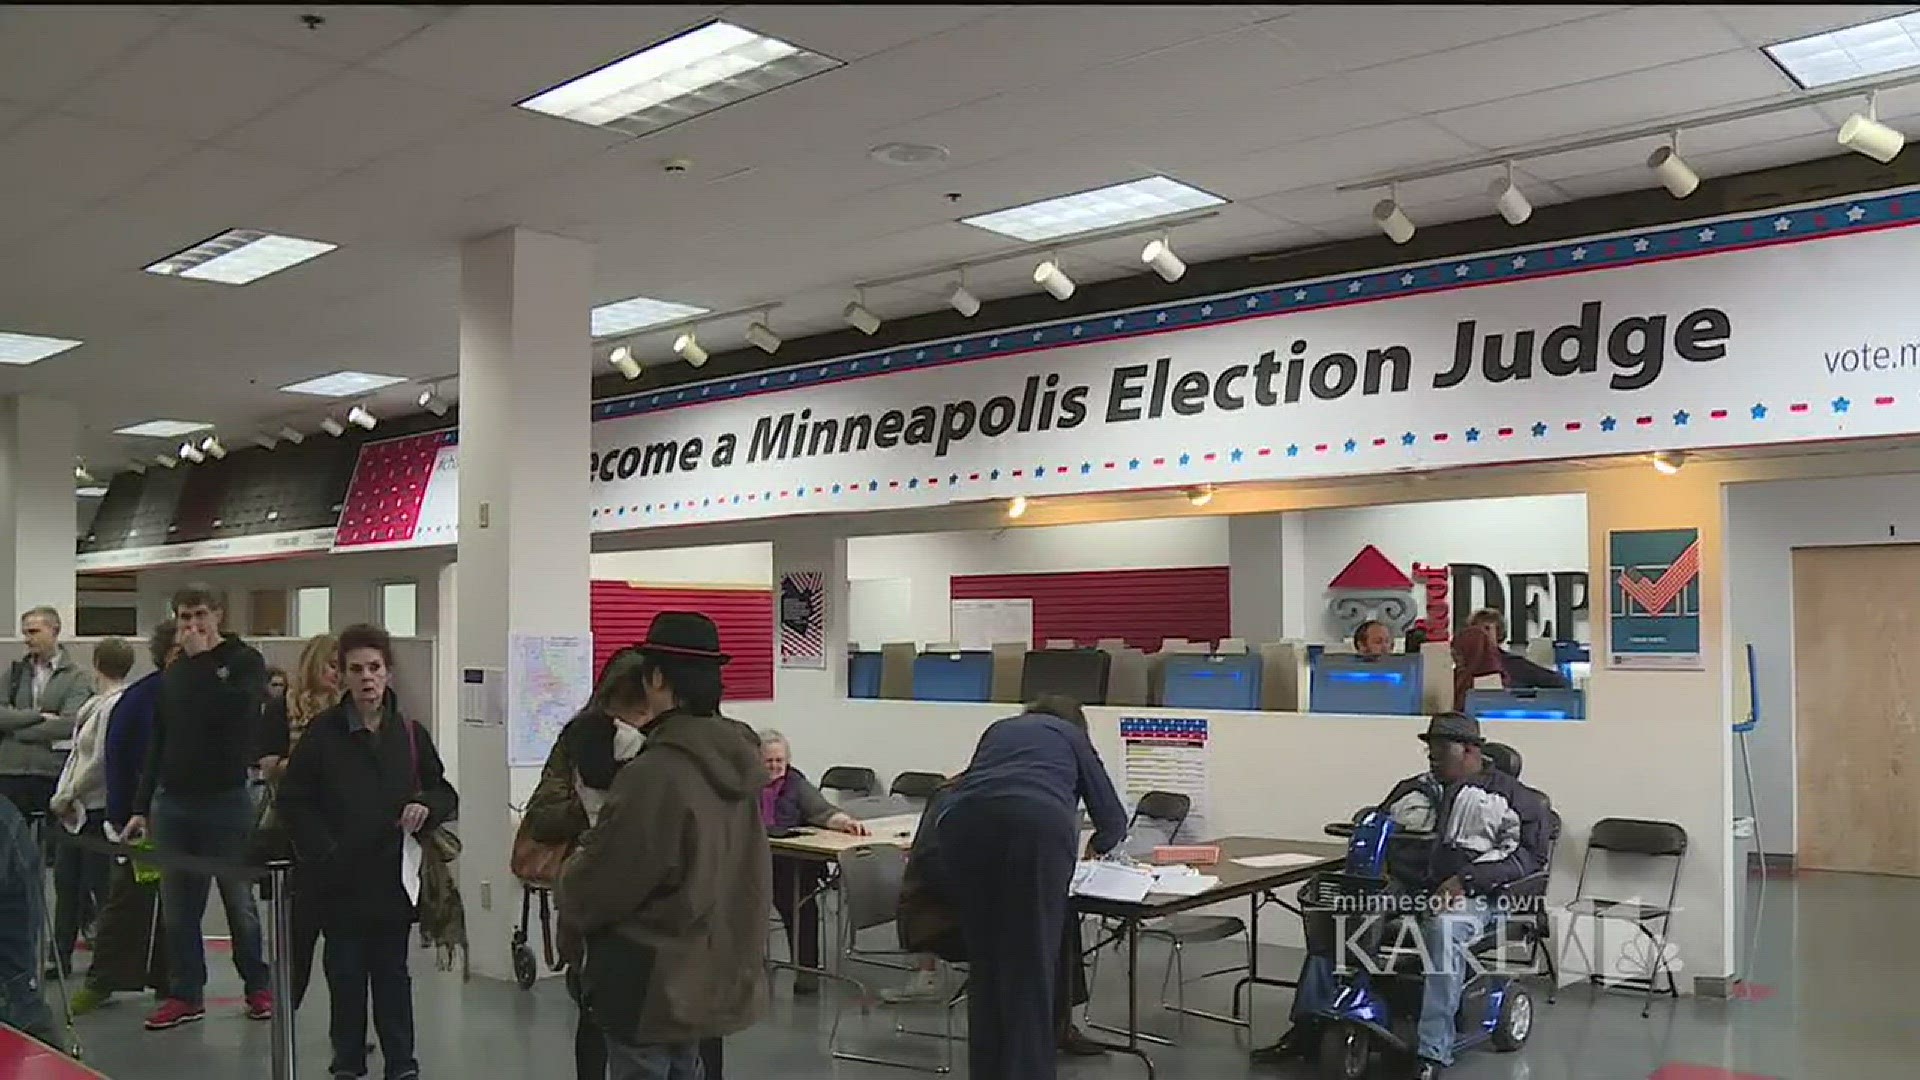 Decision 2016: Heading to the polls